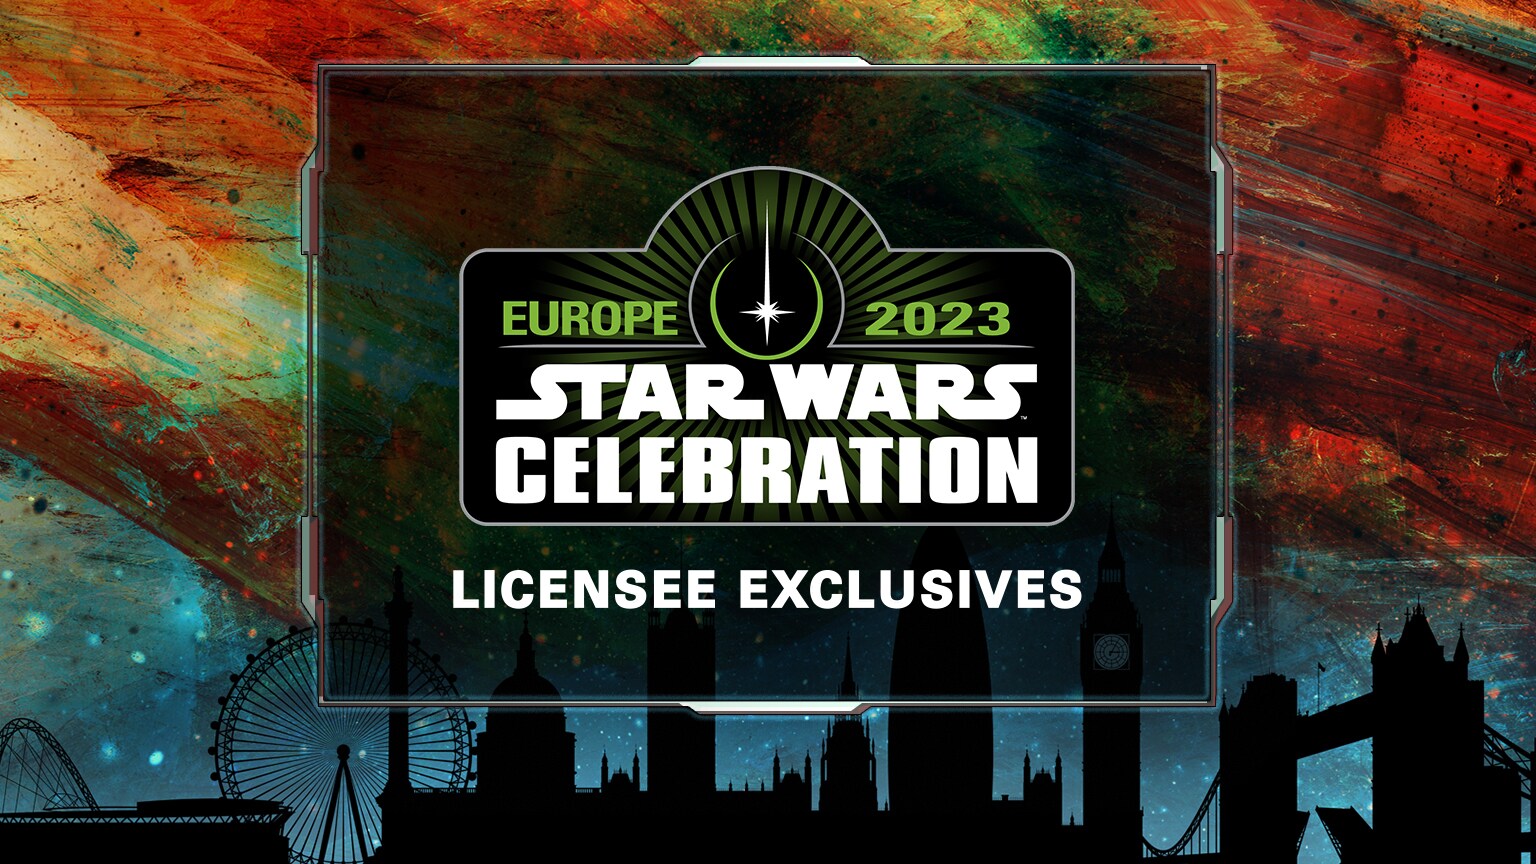 Check Out Star Wars Celebration Europe 2023 Exclusives from Hasbro, the LEGO Group, and More